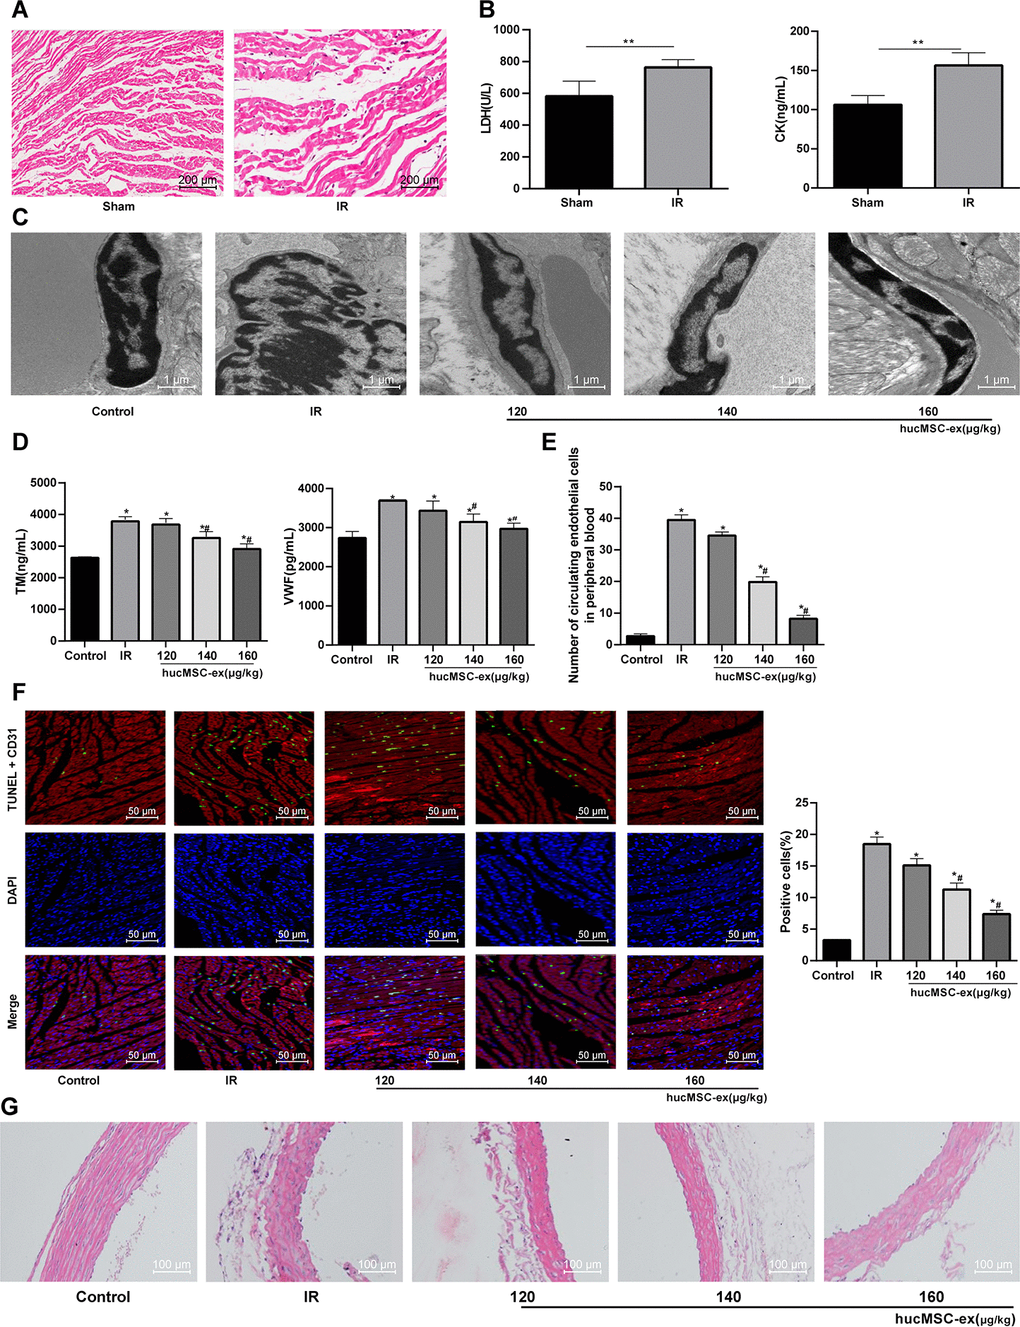 The hUCMSC-ex protects rats against the I/R injury. (A) HE staining for the detection of myocardial pathological morphology in rats injected with different concentrations of hUCMSC-ex (n = 3). (B) Levels of cardiac function indexes LDH and CK in I/R rats injected with different concentrations of hUCMSC-ex measured by ELISA kits (n = 8). (C) Ultrastructure of CMECs in I/R rats injected with different concentrations of hUCMSC-ex observed under transmission electron microscope (n = 3). (D) Serum TM and vWF levels in I/R rats injected with different concentrations of hUCMSC-ex measured by ELISA kits (n = 8). (E) The number of CECs in I/R rats injected with different concentrations of hUCMSC-ex measured by flow cytometry (n = 8). (F) CD31 + TUNEL-positive CMECs in I/R rats injected with different concentrations of hUCMSC-ex (n = 3). CMECs were red labeled by CD31, TUNEL-positive cells were green, and DAPI was blue. (G) HE staining of arterial intima structure in I/R rats injected with different concentrations of hUCMSC-ex (n = 3). *p vs. the control group; #p vs. the H/R group. All experiments were repeated 3 times. Data in panel (B) were analyzed with independent t test, and data in panels (E, F and G) were analyzed by one-way ANOVA and the pairwise comparisons after ANOVA were performed with Tukey’s multiple comparisons test.